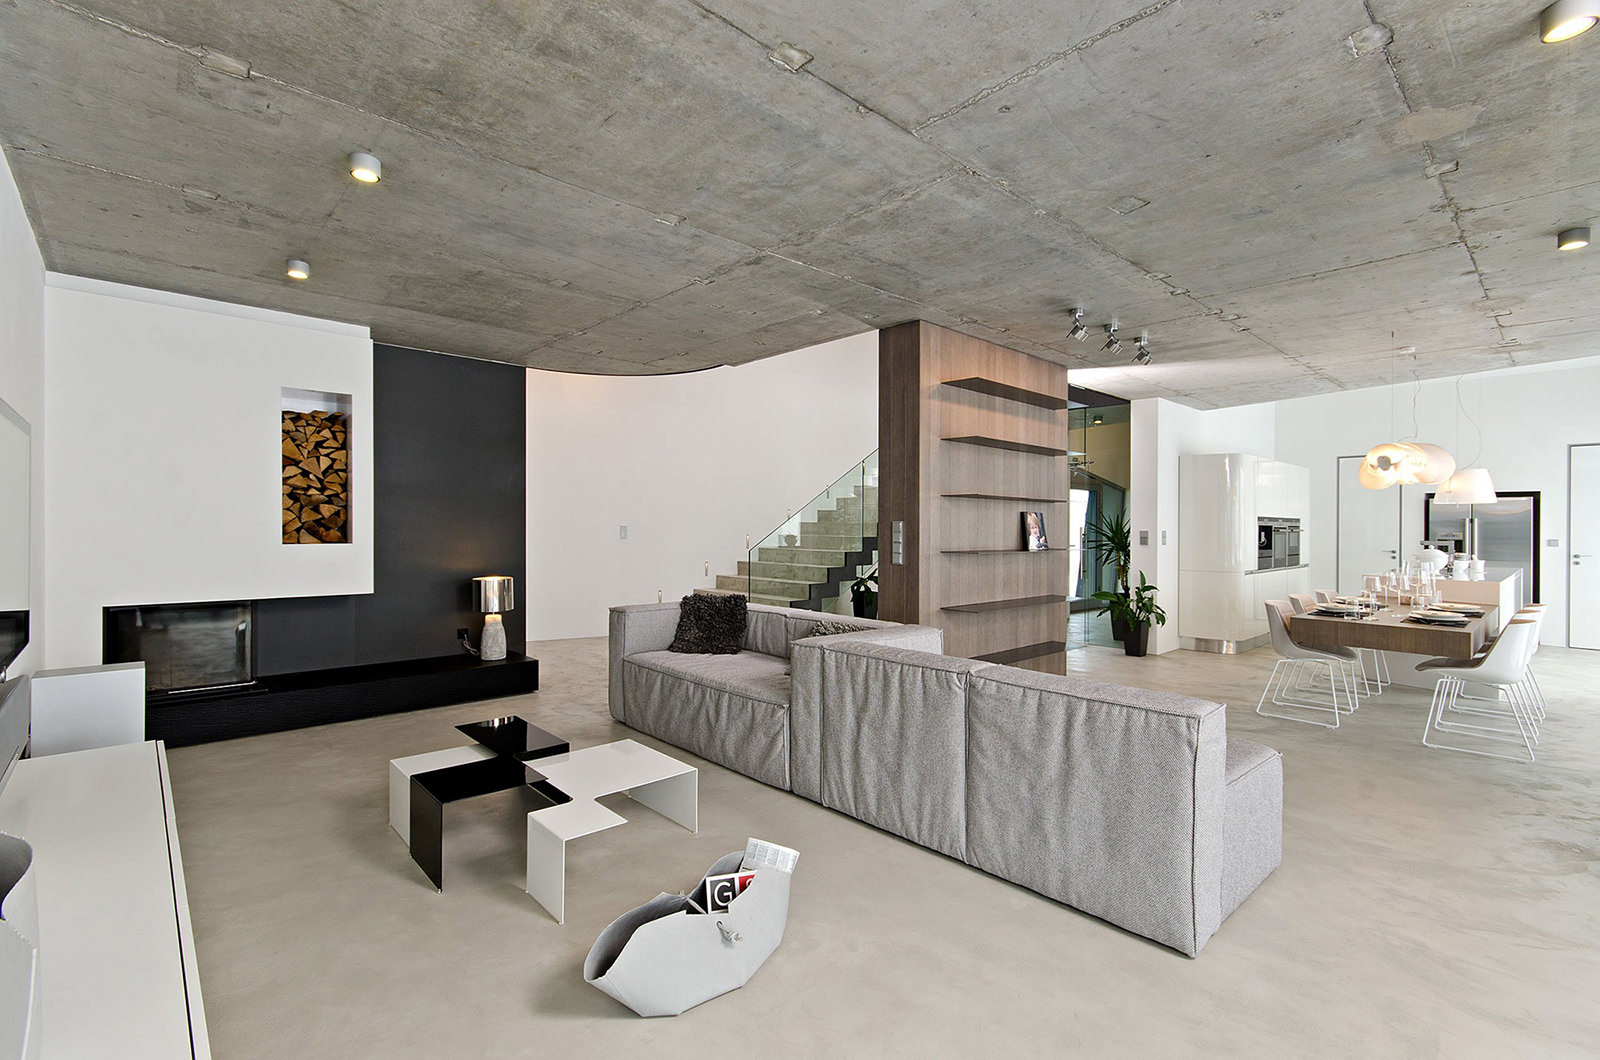 ceiling decoration with concrete in the room